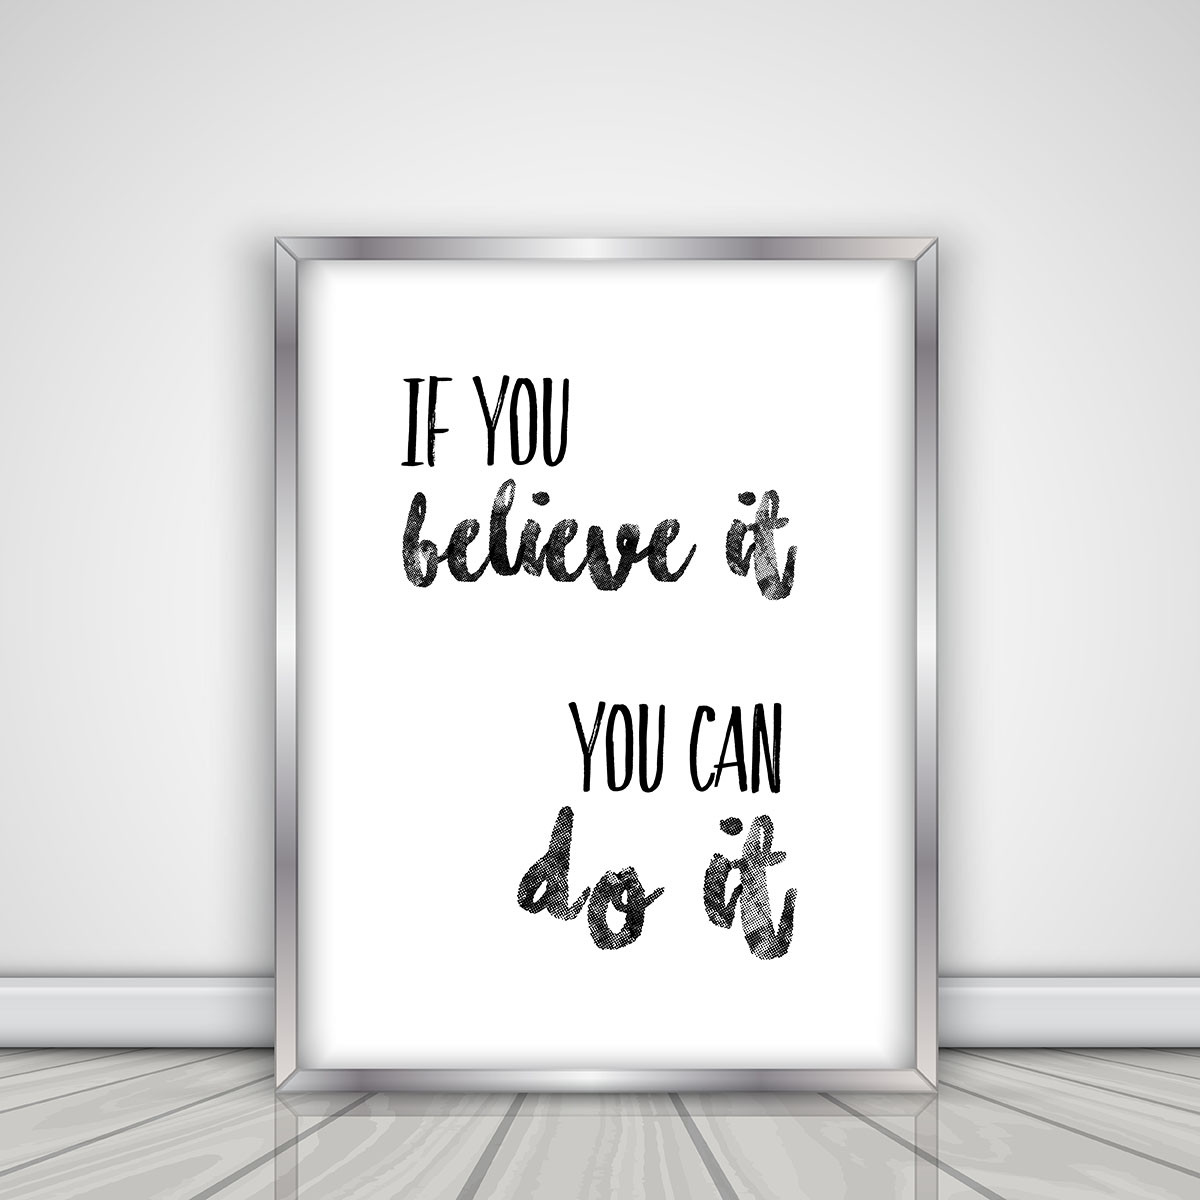 Framed Inspirational Quotes
 Inspirational quote in picture frame Download Free